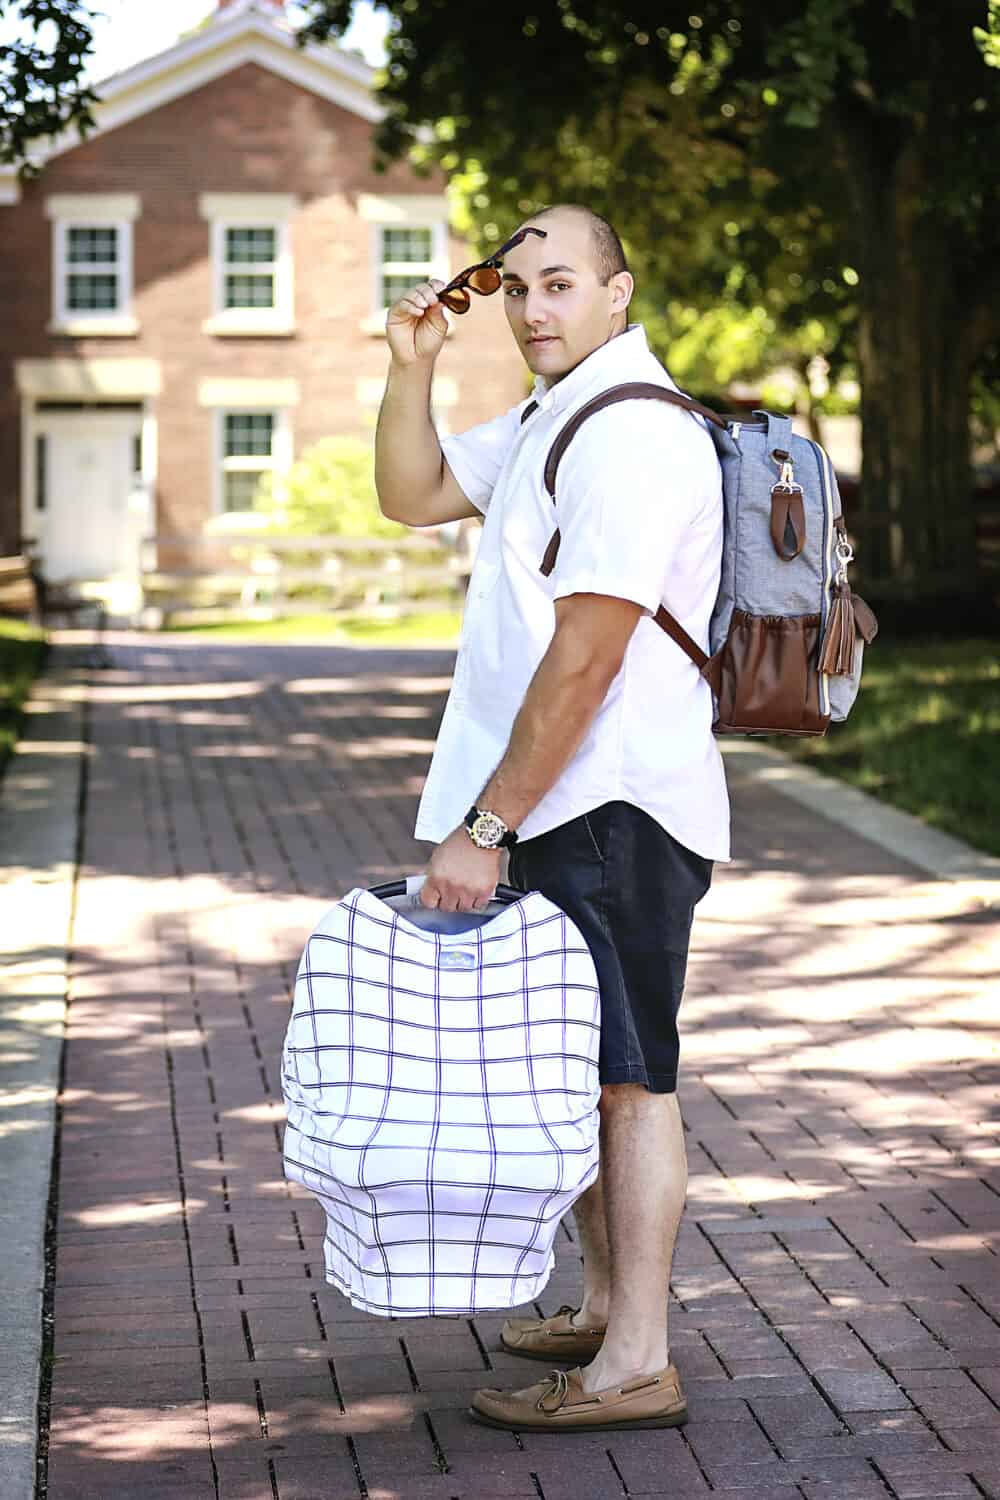 A man with a Mom Boss™ 4-IN-1 Multi-Use Nursing Cover & Scarf holding a suitcase.